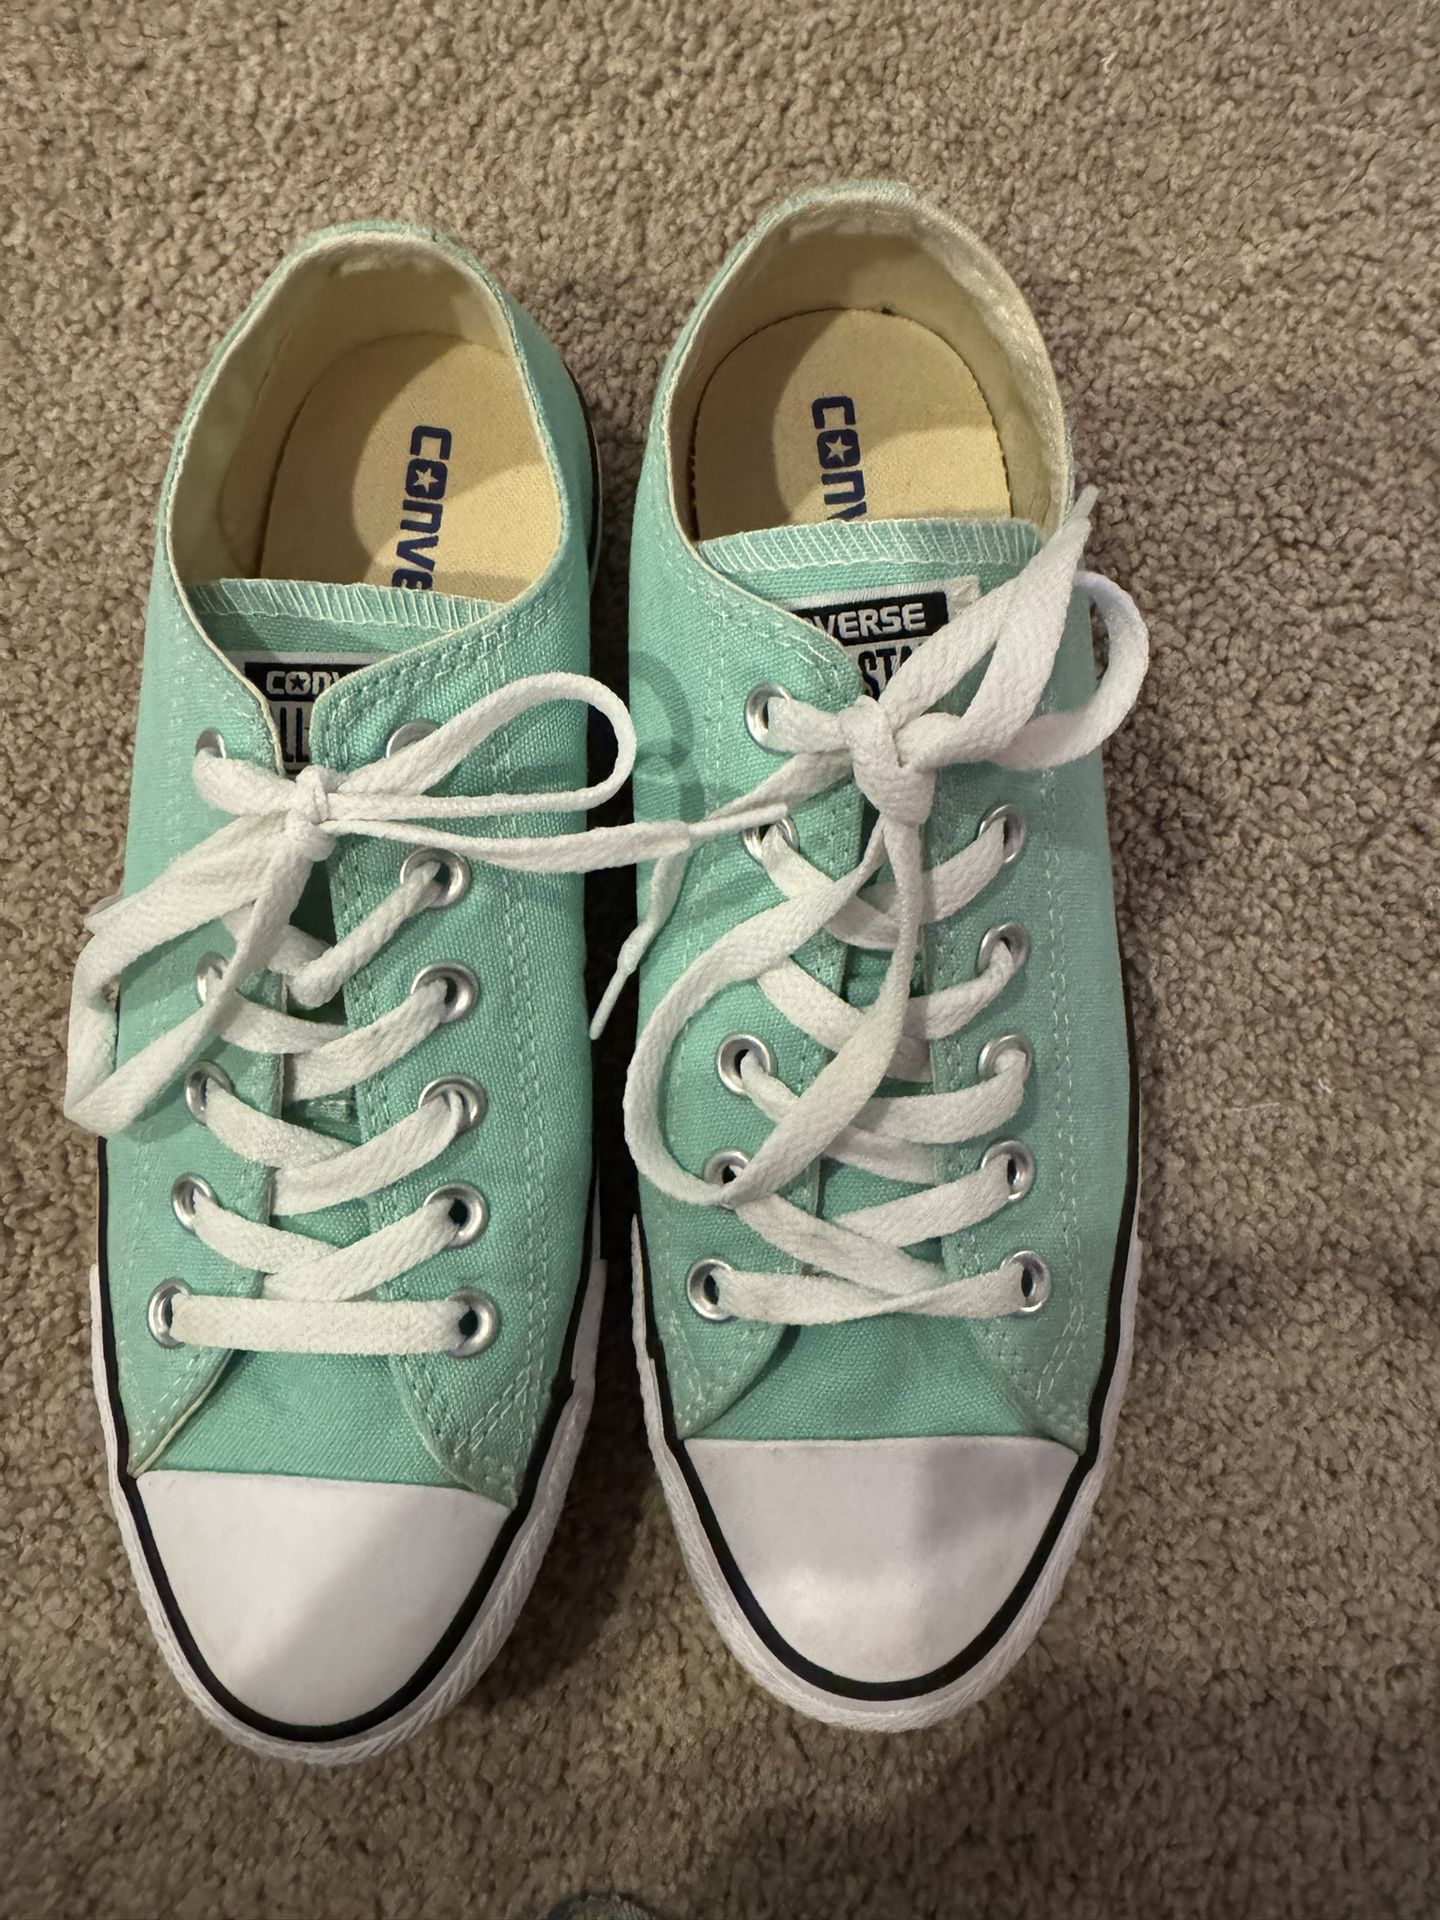 Converse women’s Lowtop Teal Shoes Size 8 